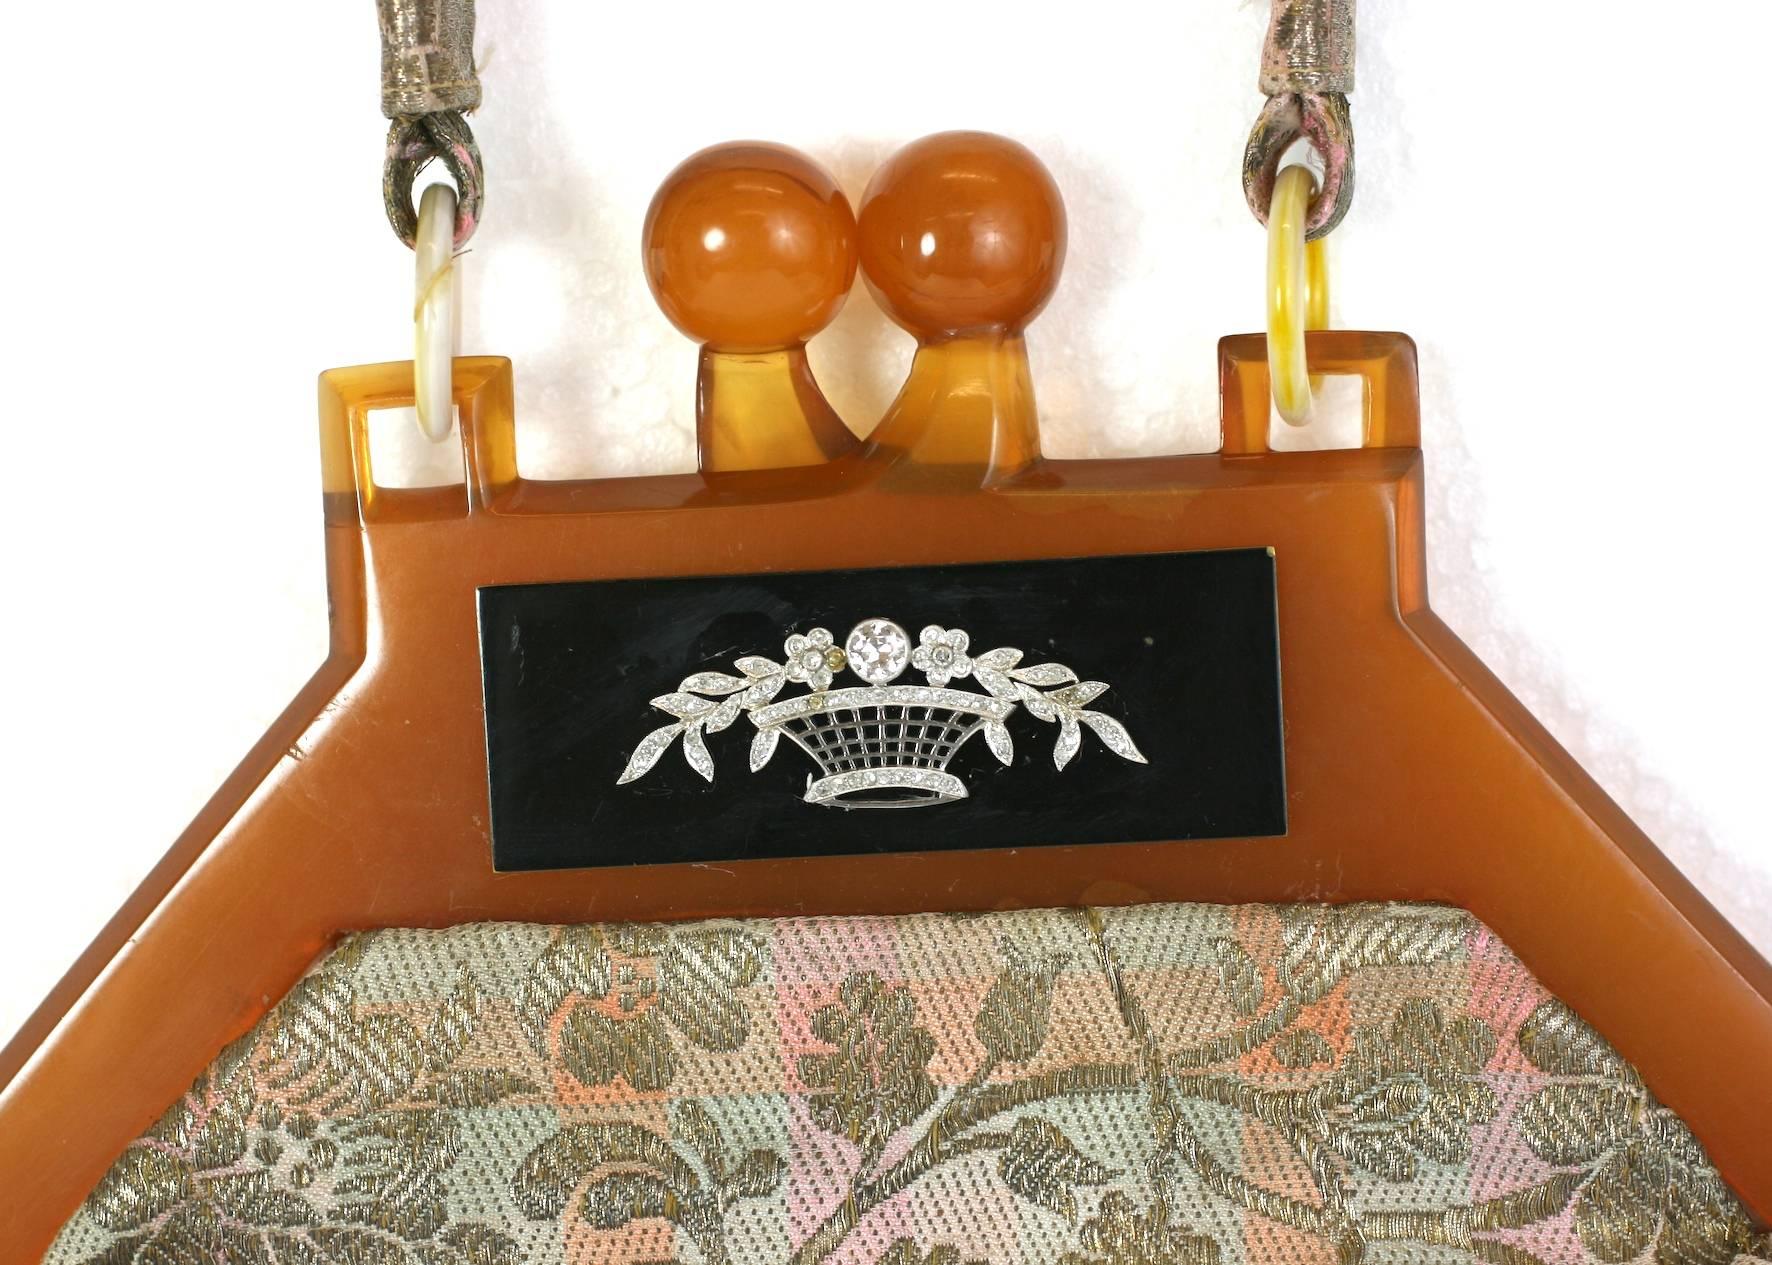 Custom Evening Bag made in the 1940's with a bakelite frame, adorned with a lovely Art Deco diamond basket on a French lame broche base.
The tortoise bakelite frame has a black bakelite panel insert decorated with an Art Deco diamond basket motif.